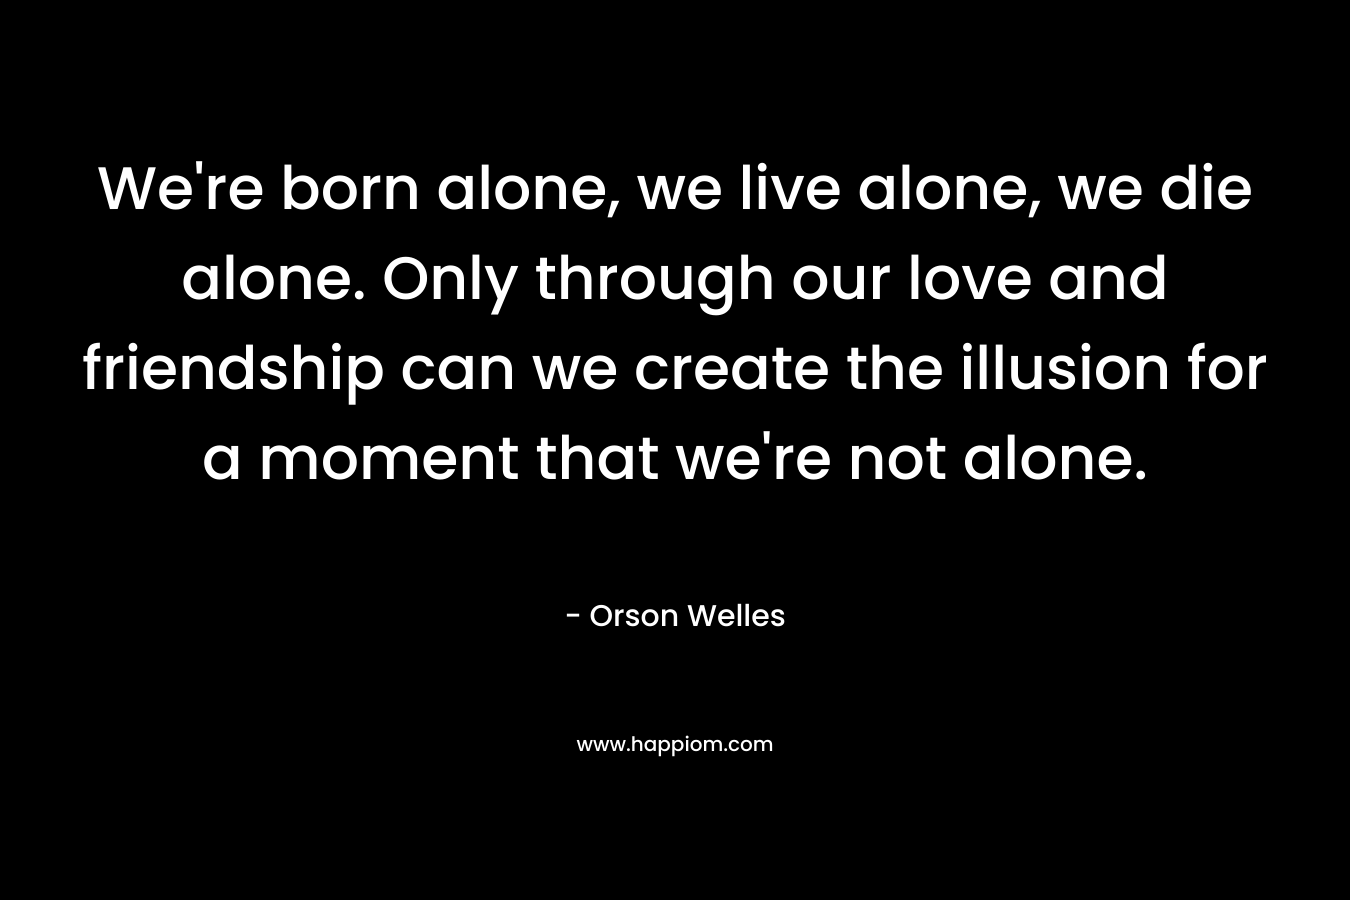 We're born alone, we live alone, we die alone. Only through our love and friendship can we create the illusion for a moment that we're not alone.